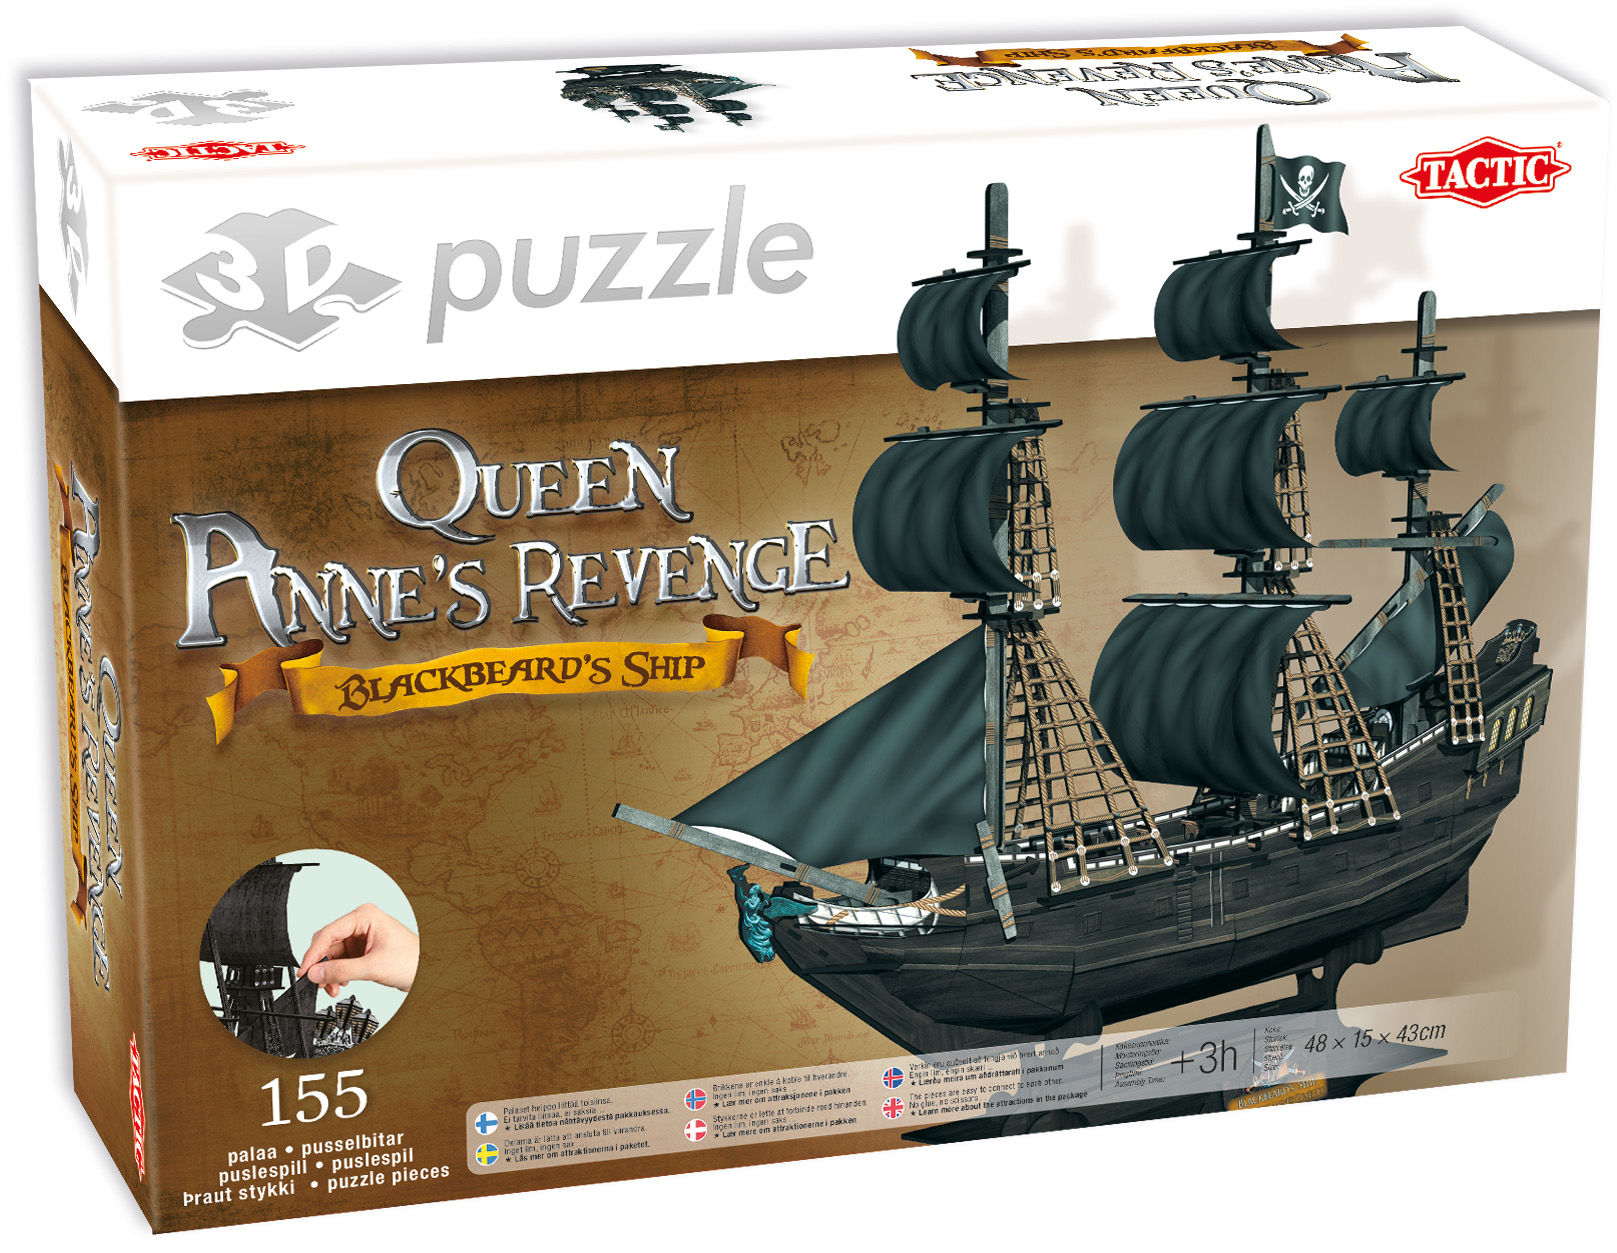 Tactic Puslespill 3D Puzzle The Queen Anne”‘s Revenge